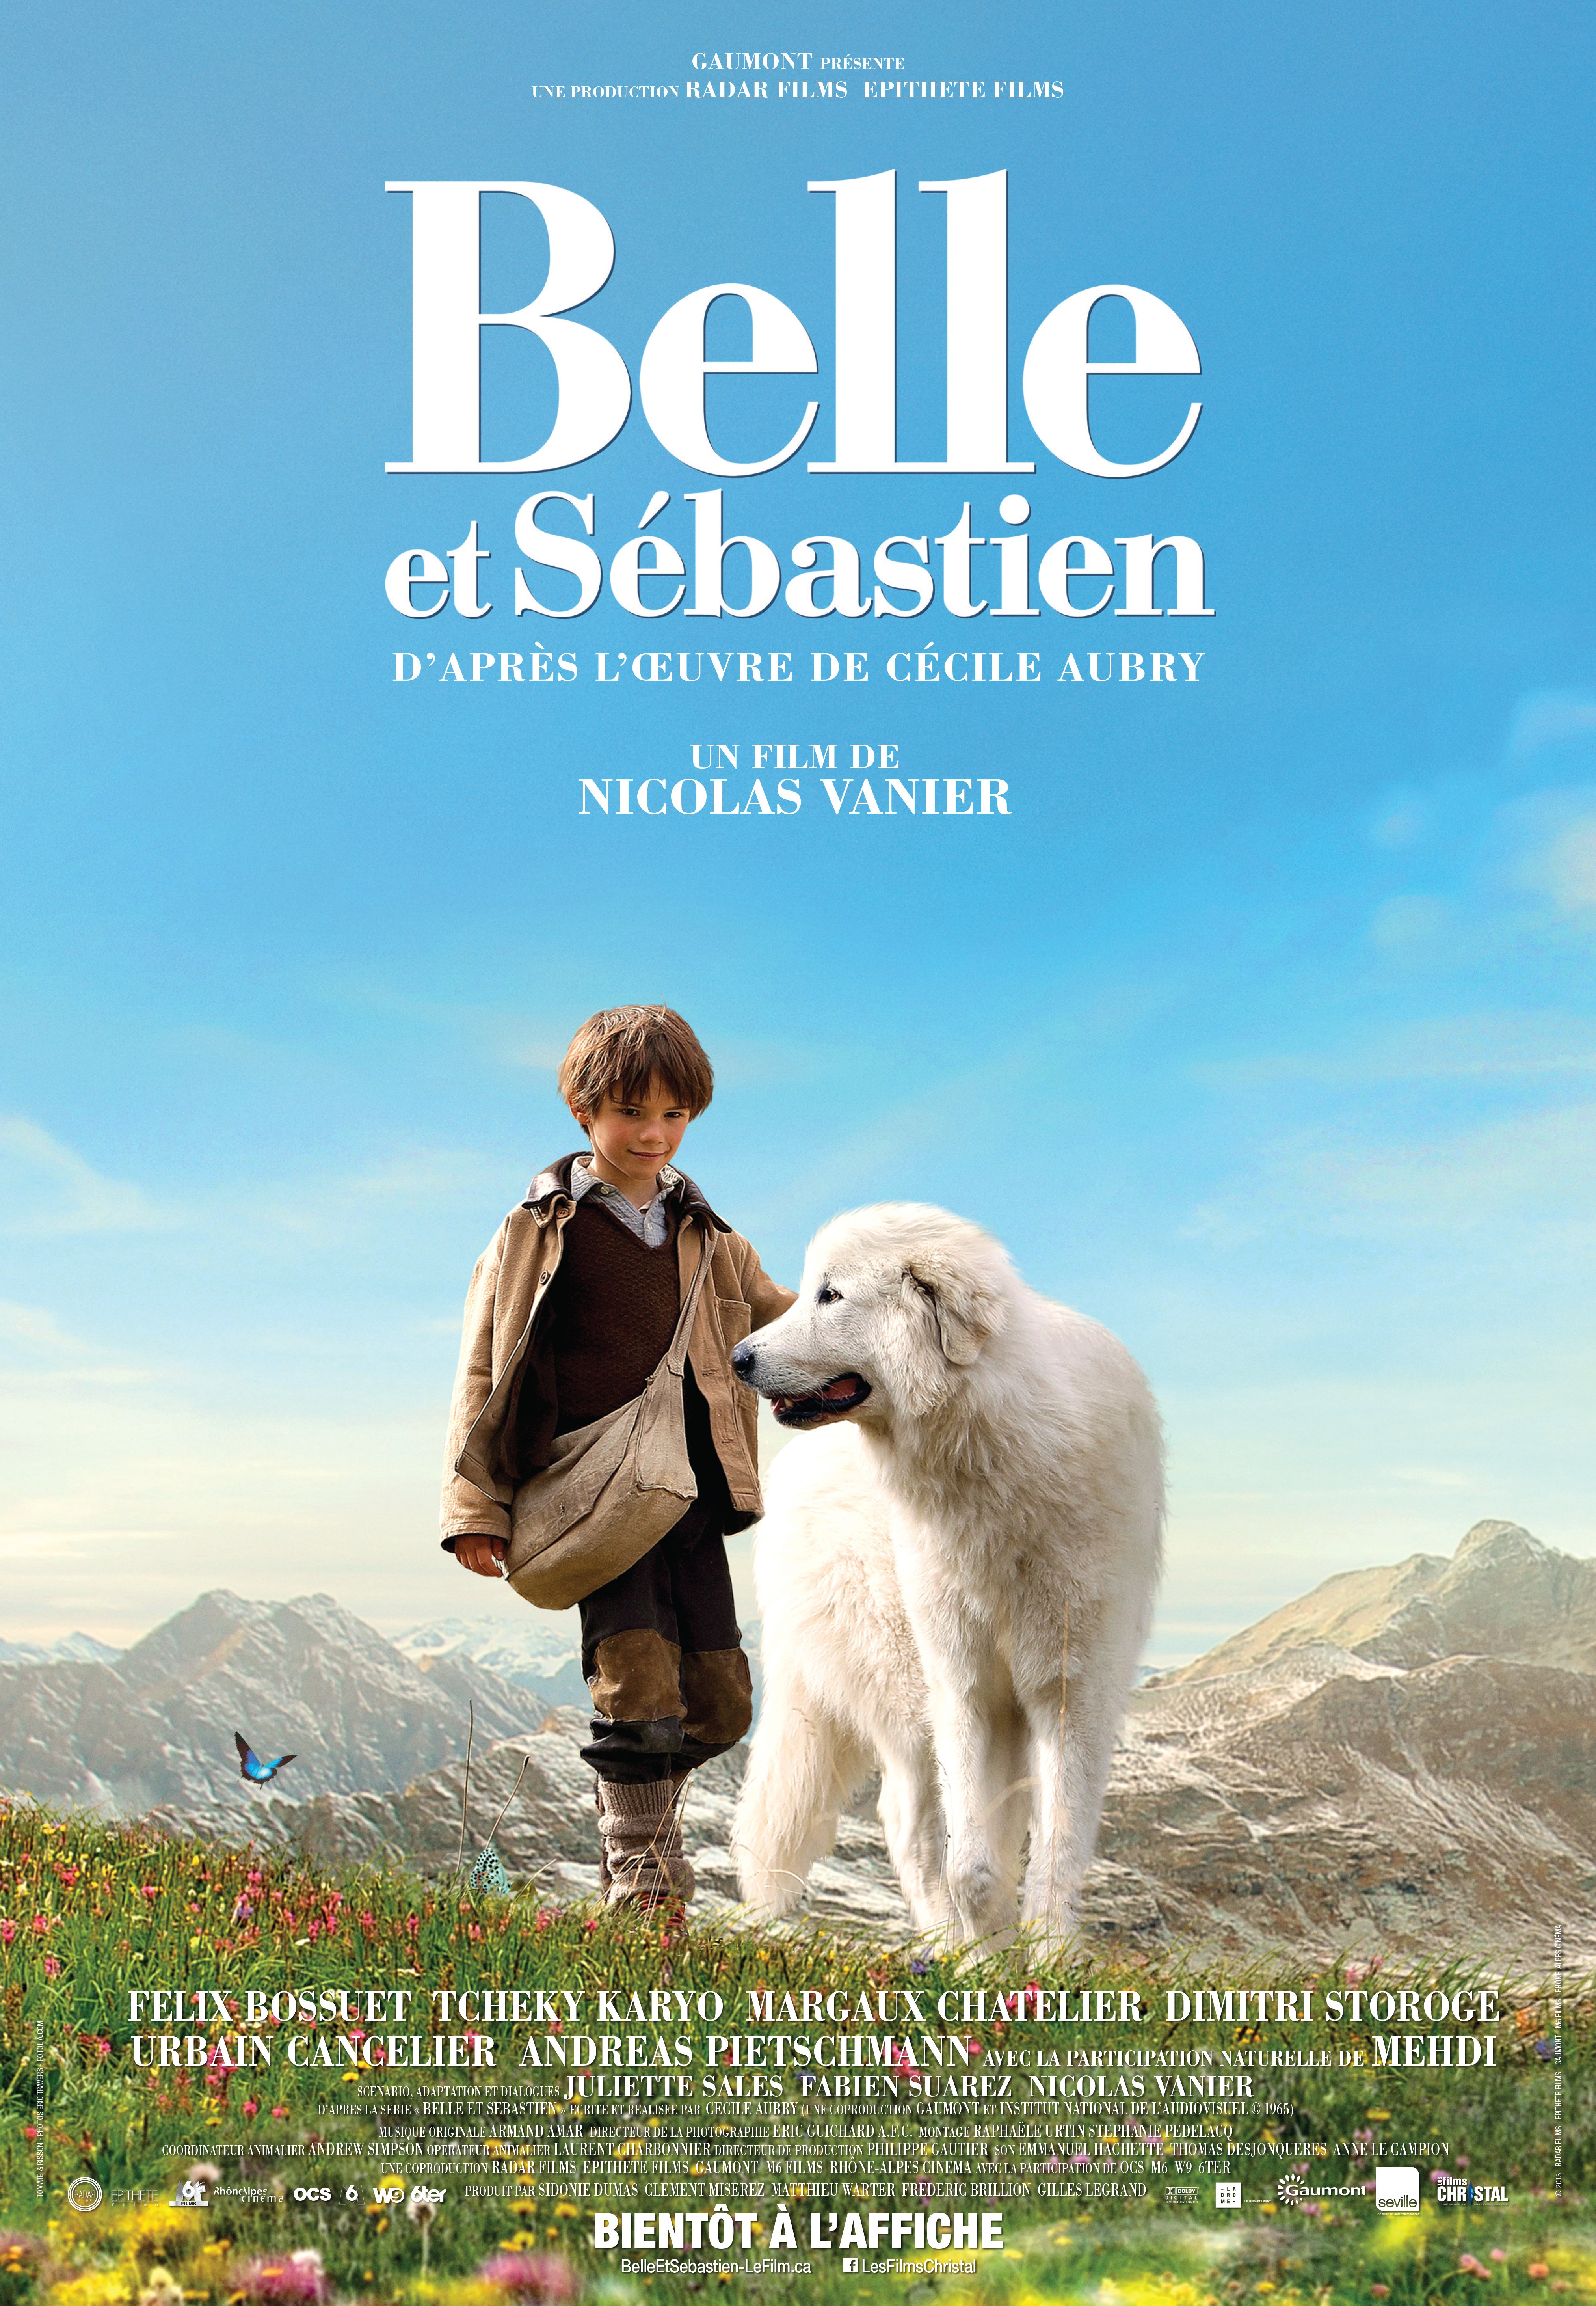 Poster of the movie Belle and Sebastian